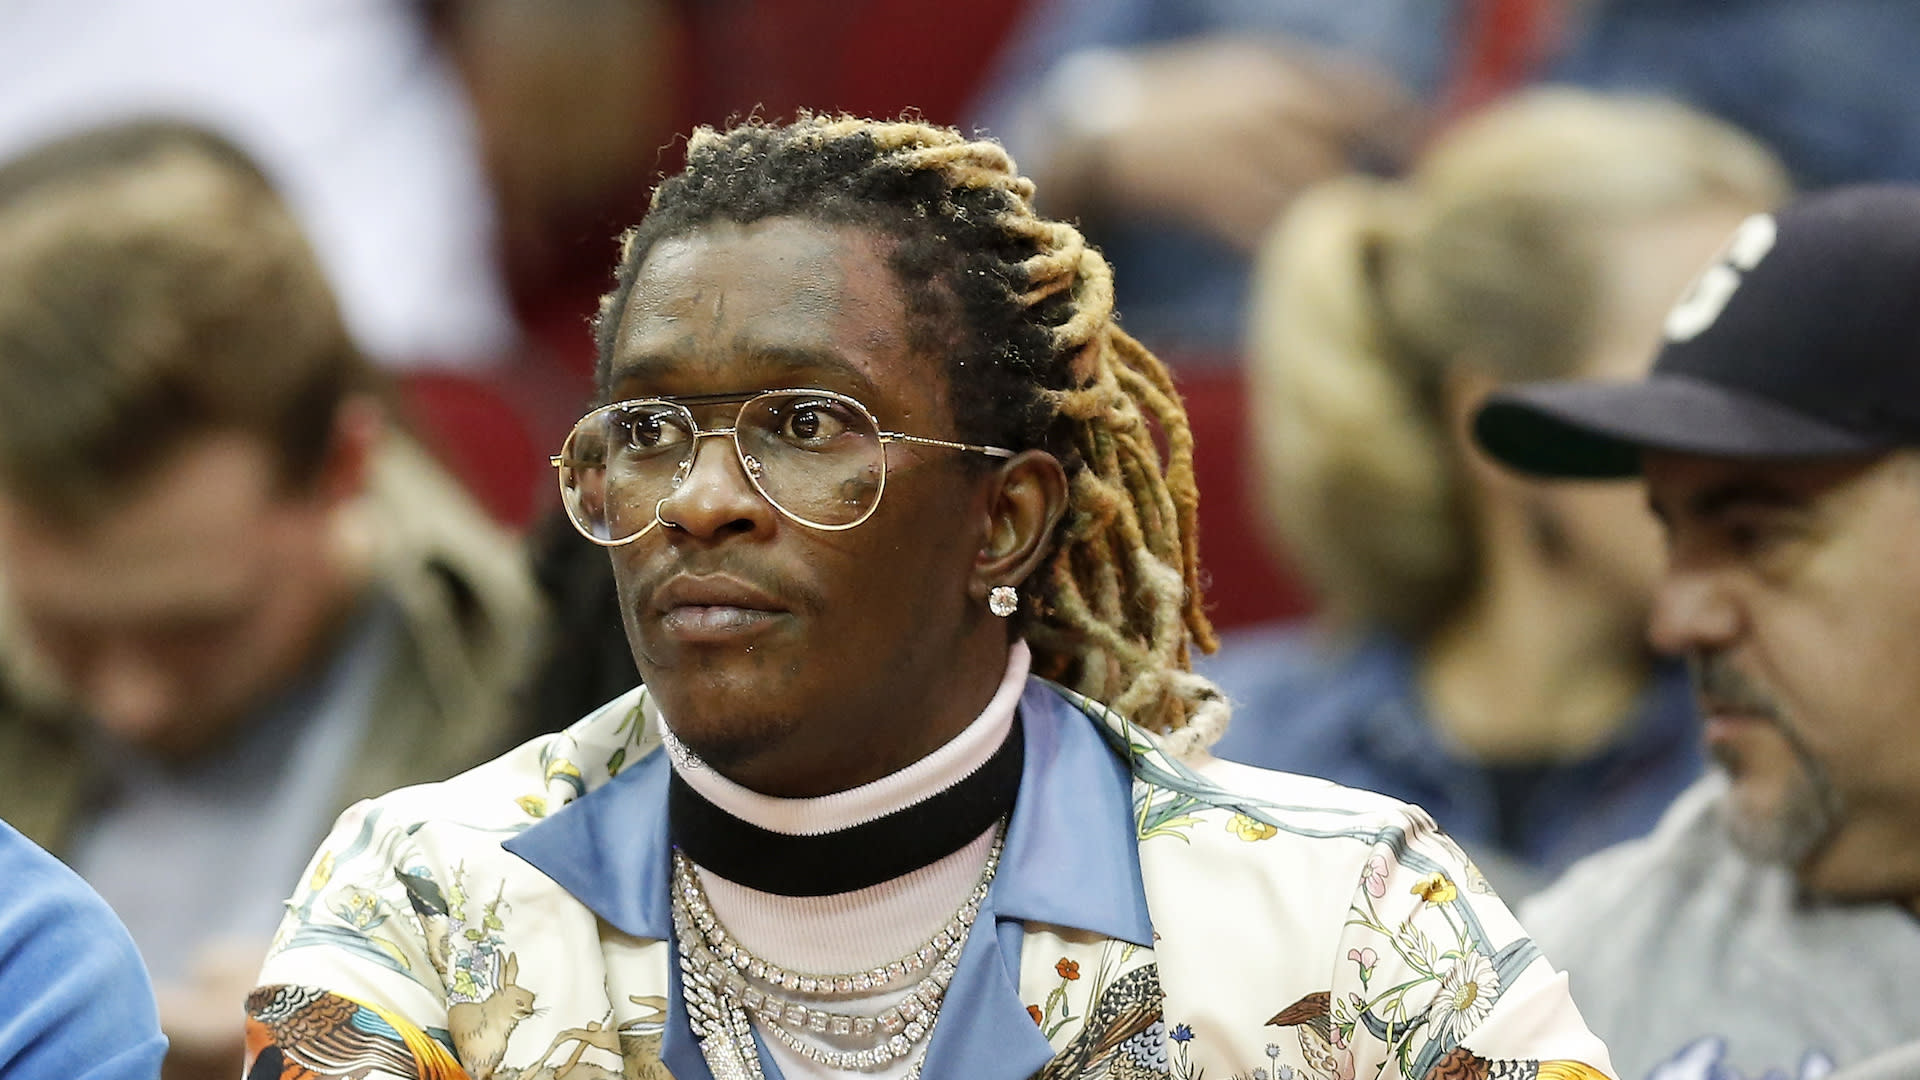 Young Thug apparently responds to abuse allegations by claiming he has been single for 2 years